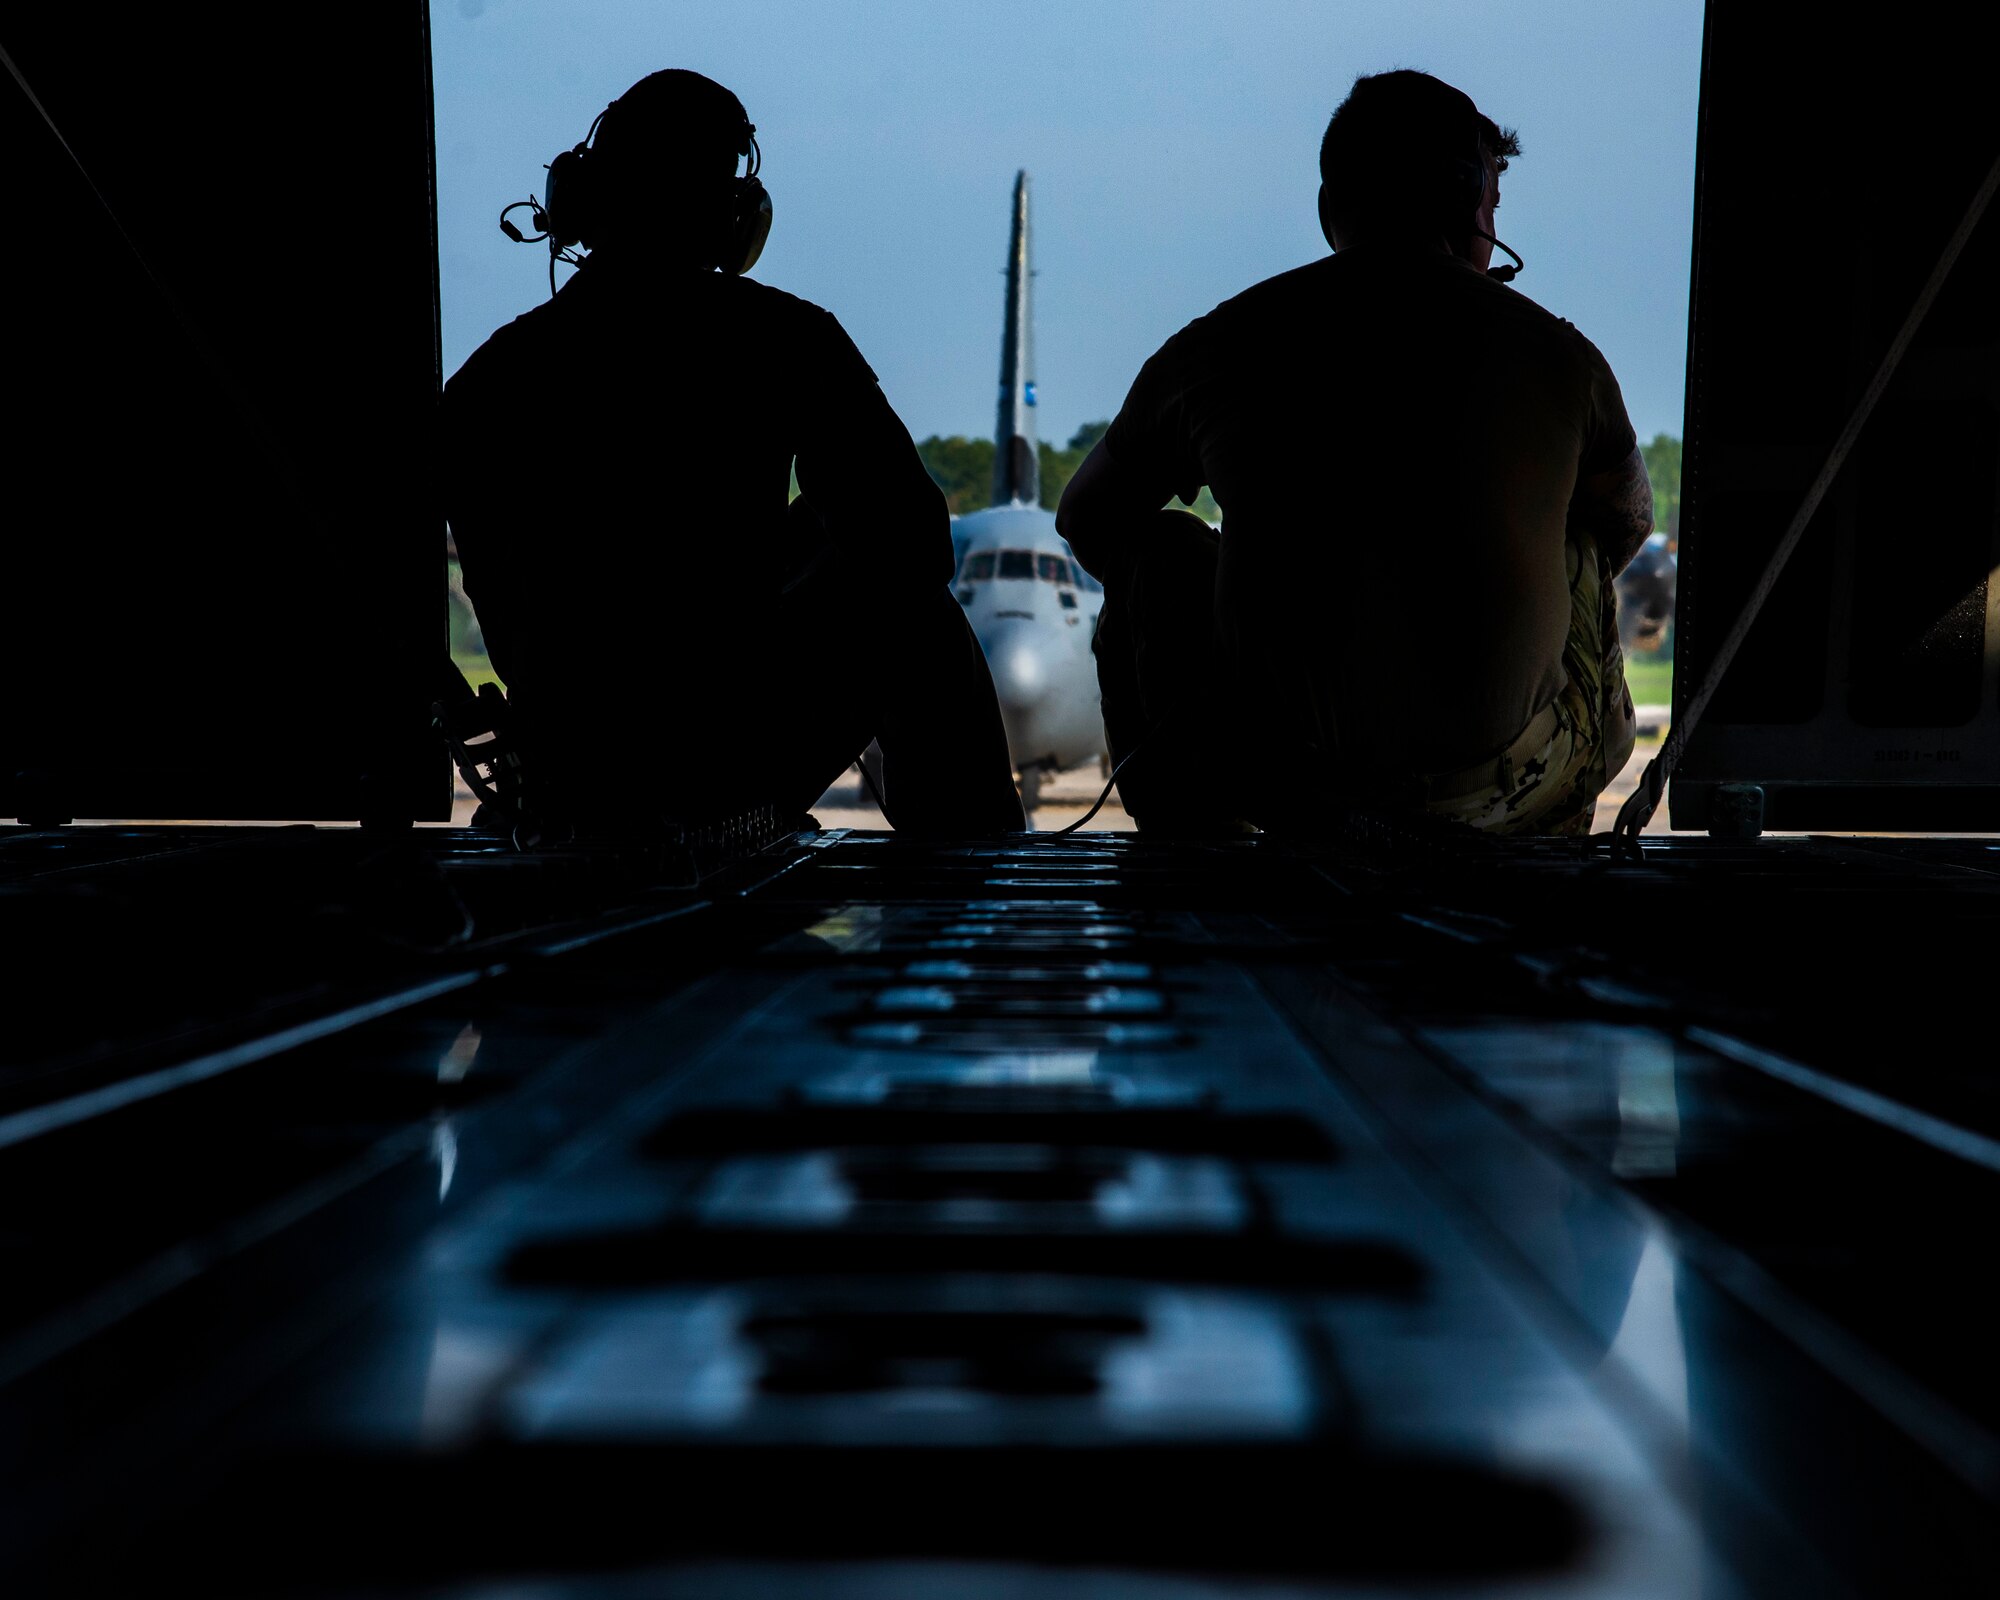 Staff Sgt. Anthony Miller, 327th Airlift Squadron loadmaster (left), and Tech. Sgt. William Mcleod, 327th Airlift Squadron loadmaster (right), ride in the back of a C-130J Hercules as it taxis the runway at Little Rock Air Force Base, Ark. August 7, 2019. The C-130 crew was taking part in a competition called the “turkey shoot.” The first part of the competition is loading and unloading a Humvee for time. Miller was in charge of guiding the Humvee and securing it into the aircraft, while Mcleod was in charge of the cargo drop. The Reserves have one weekend a month, two weeks a year to fulfill training in order to prepare for real world missions and requirements. (U.S. Air Force Reserve Photo by Senior Airman Chase Cannon)